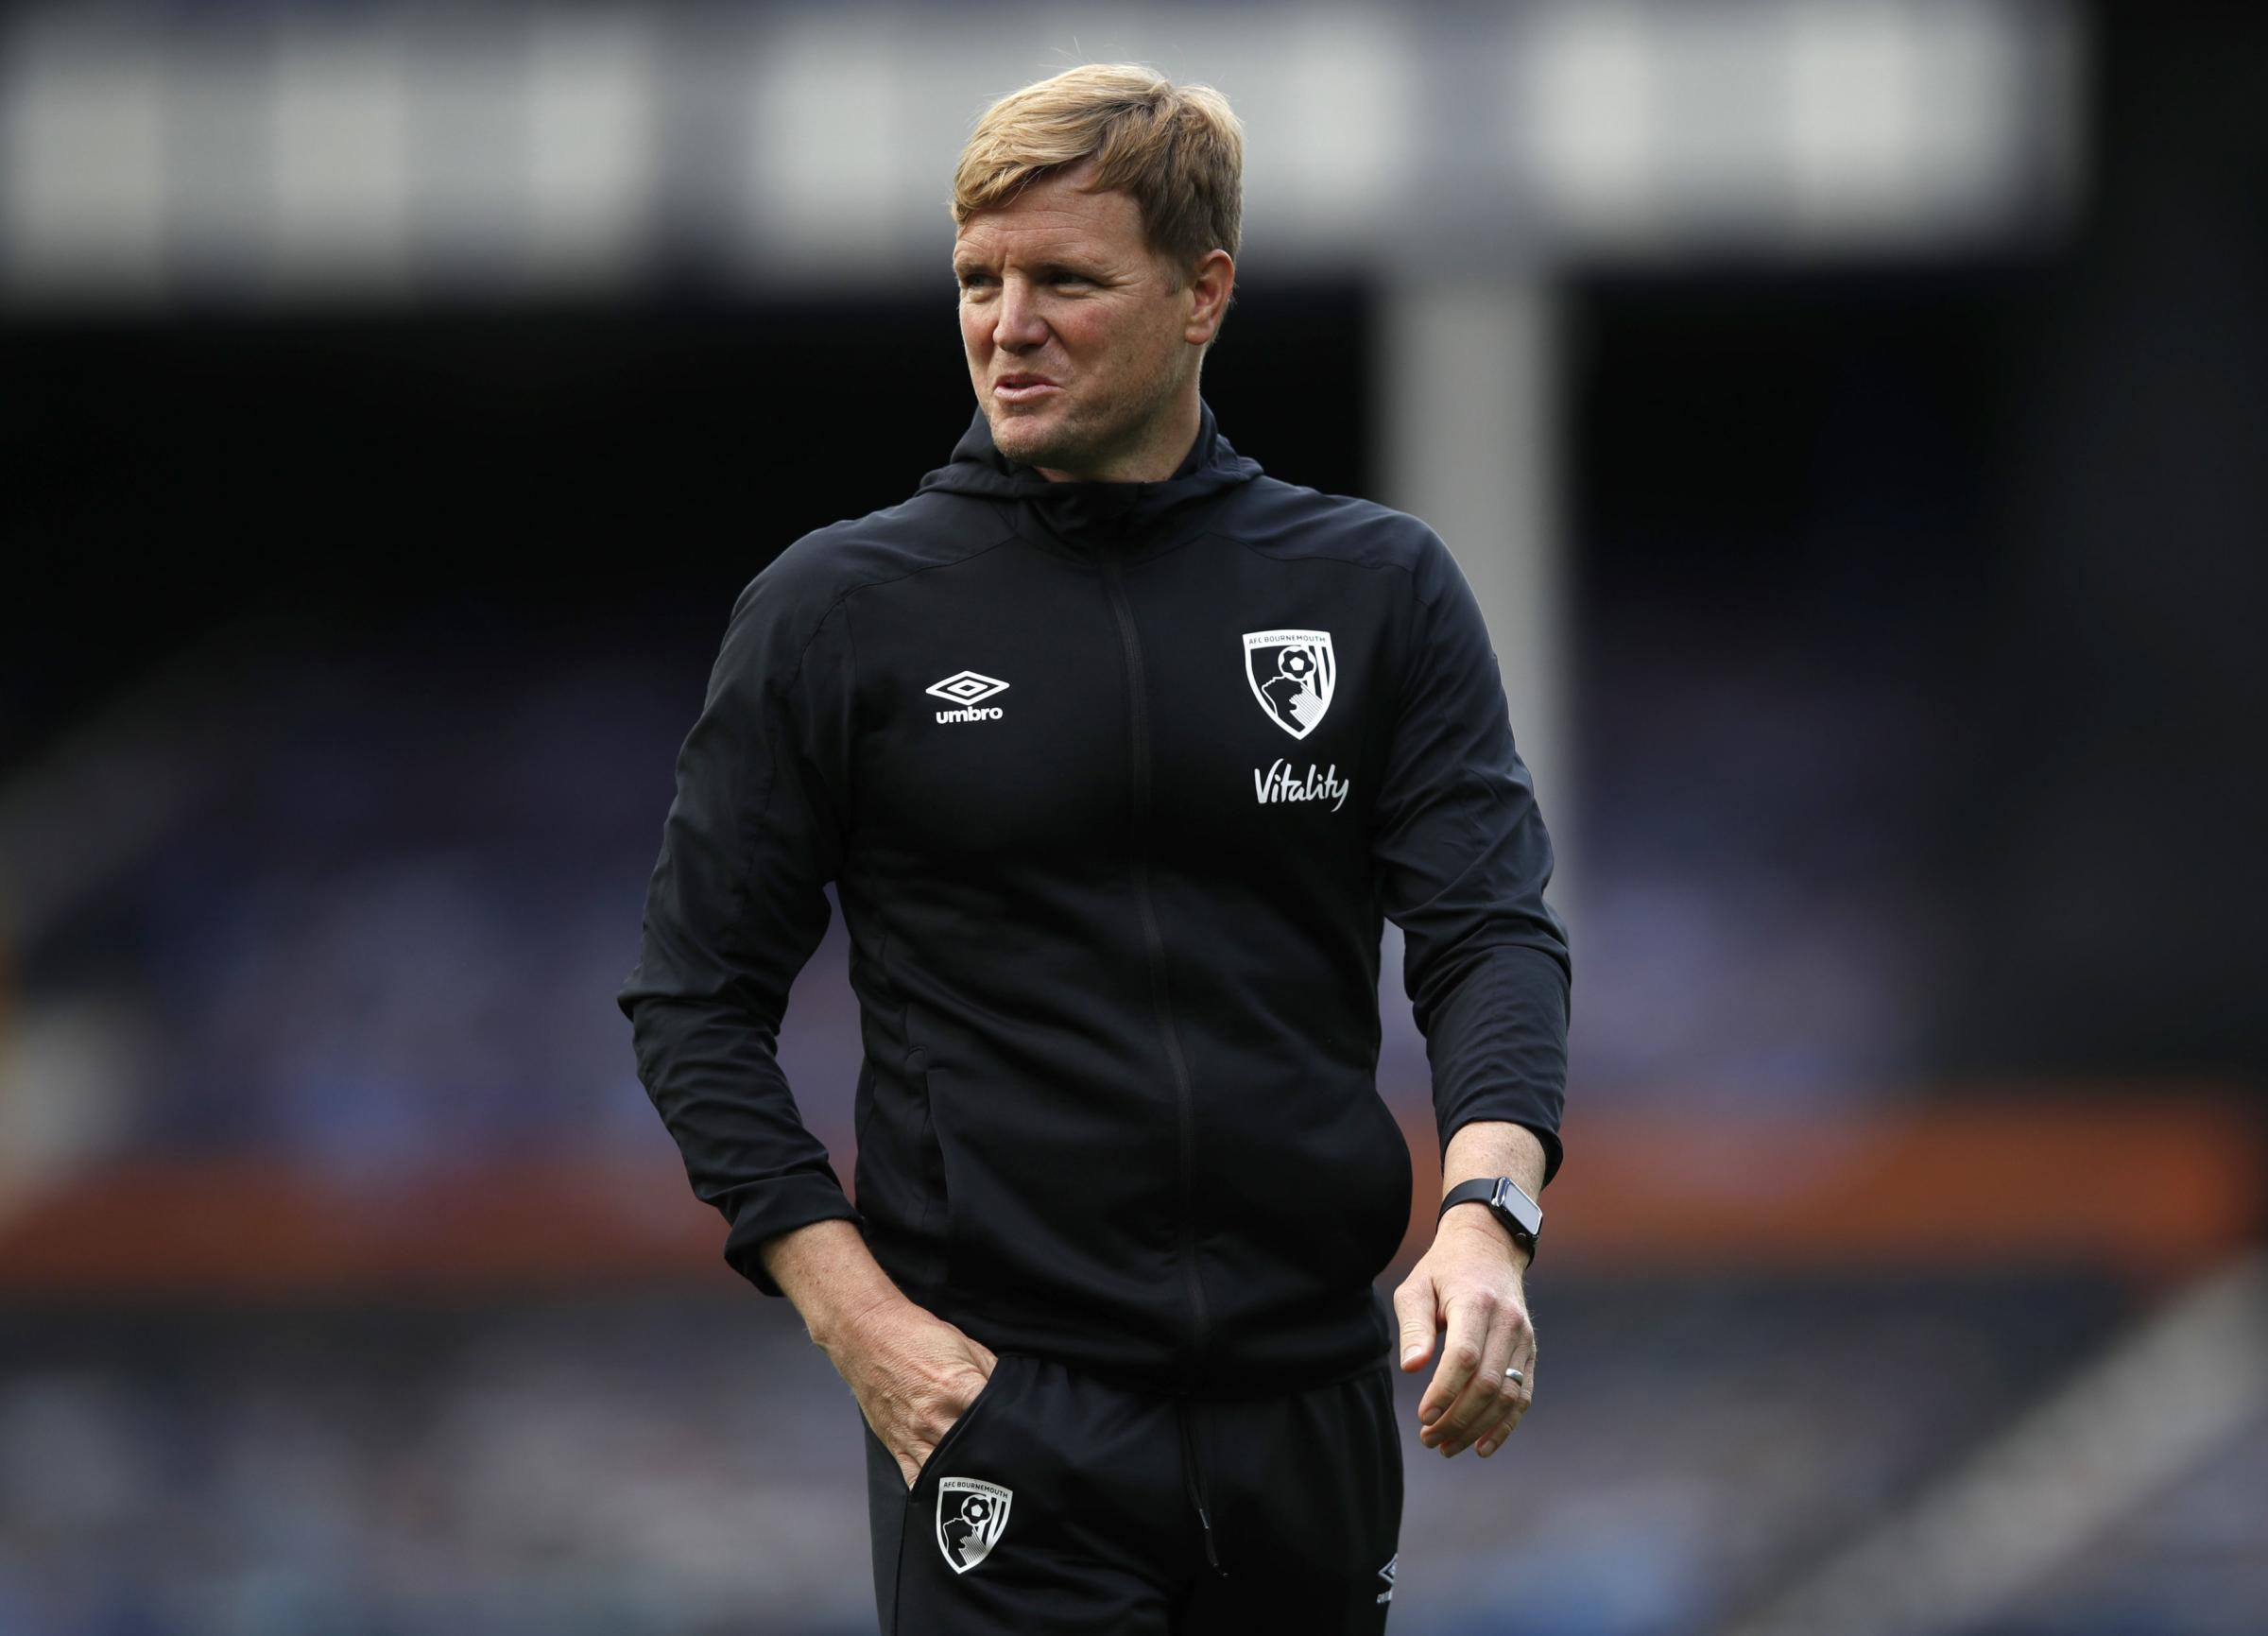 Parker: Eddie Howe has earned the right to get an opportunity